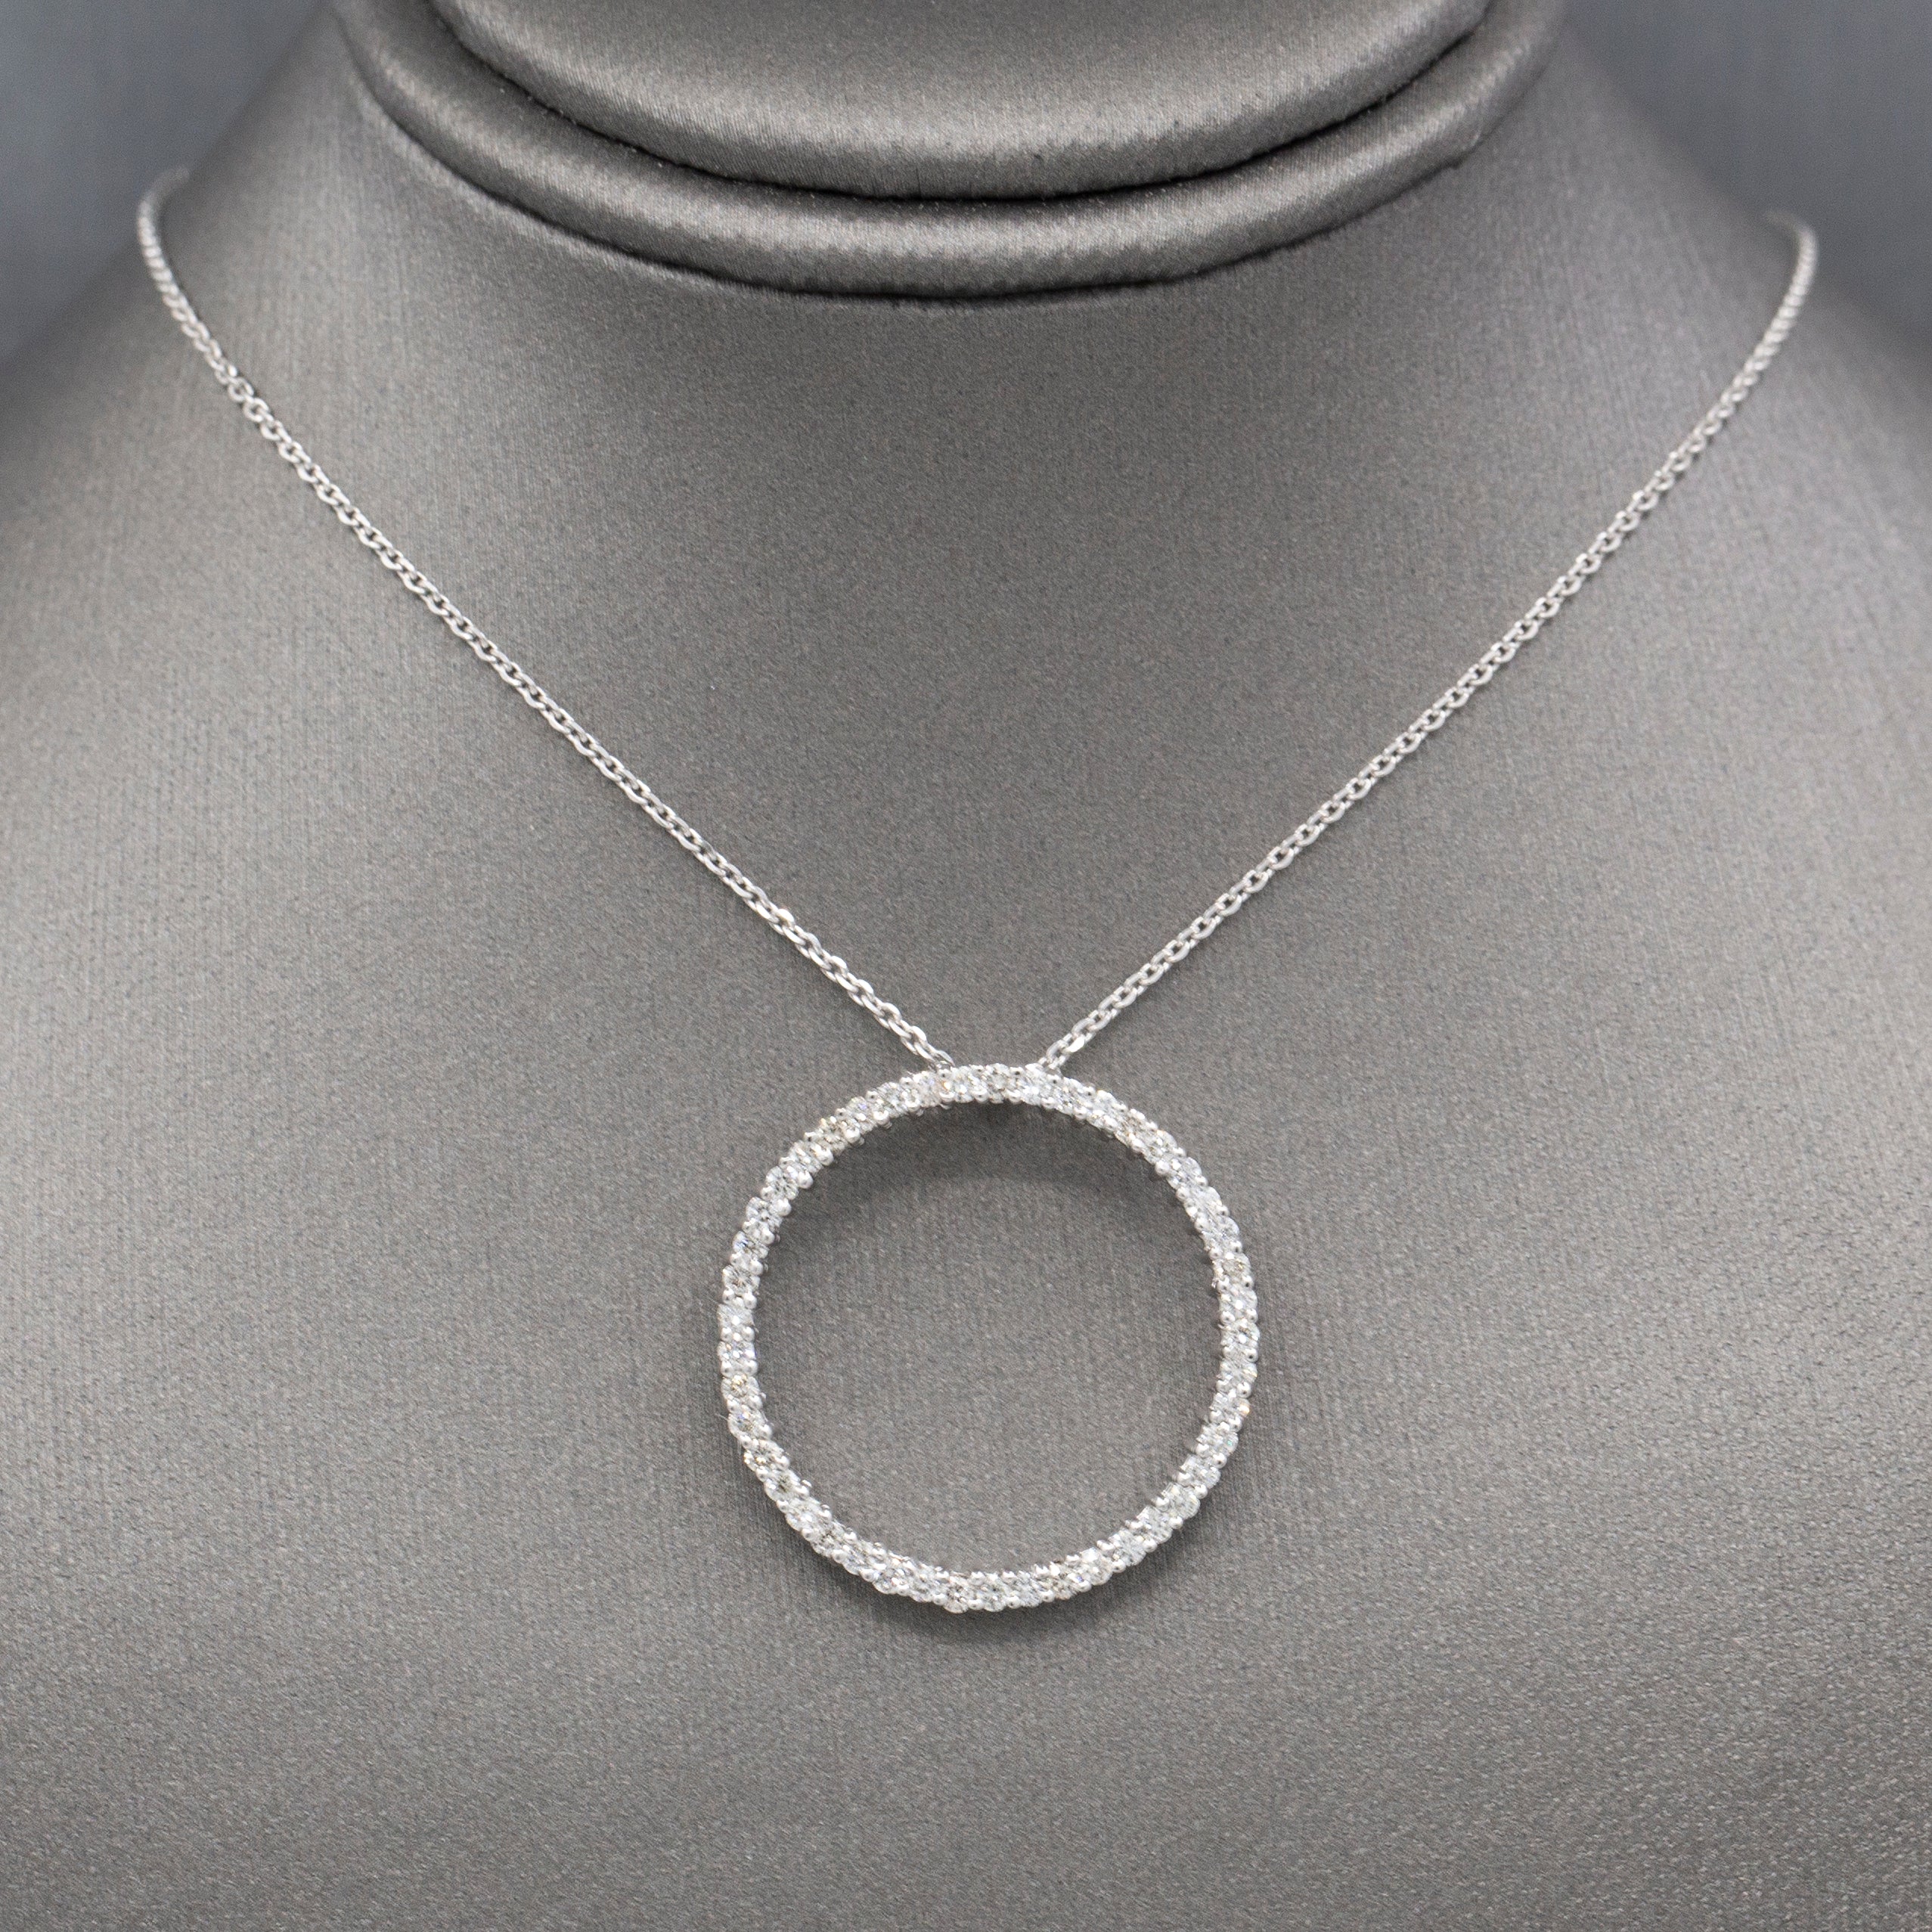 Sparkling Diamond Infinity Circle Pendant Necklace in 14k White Gold